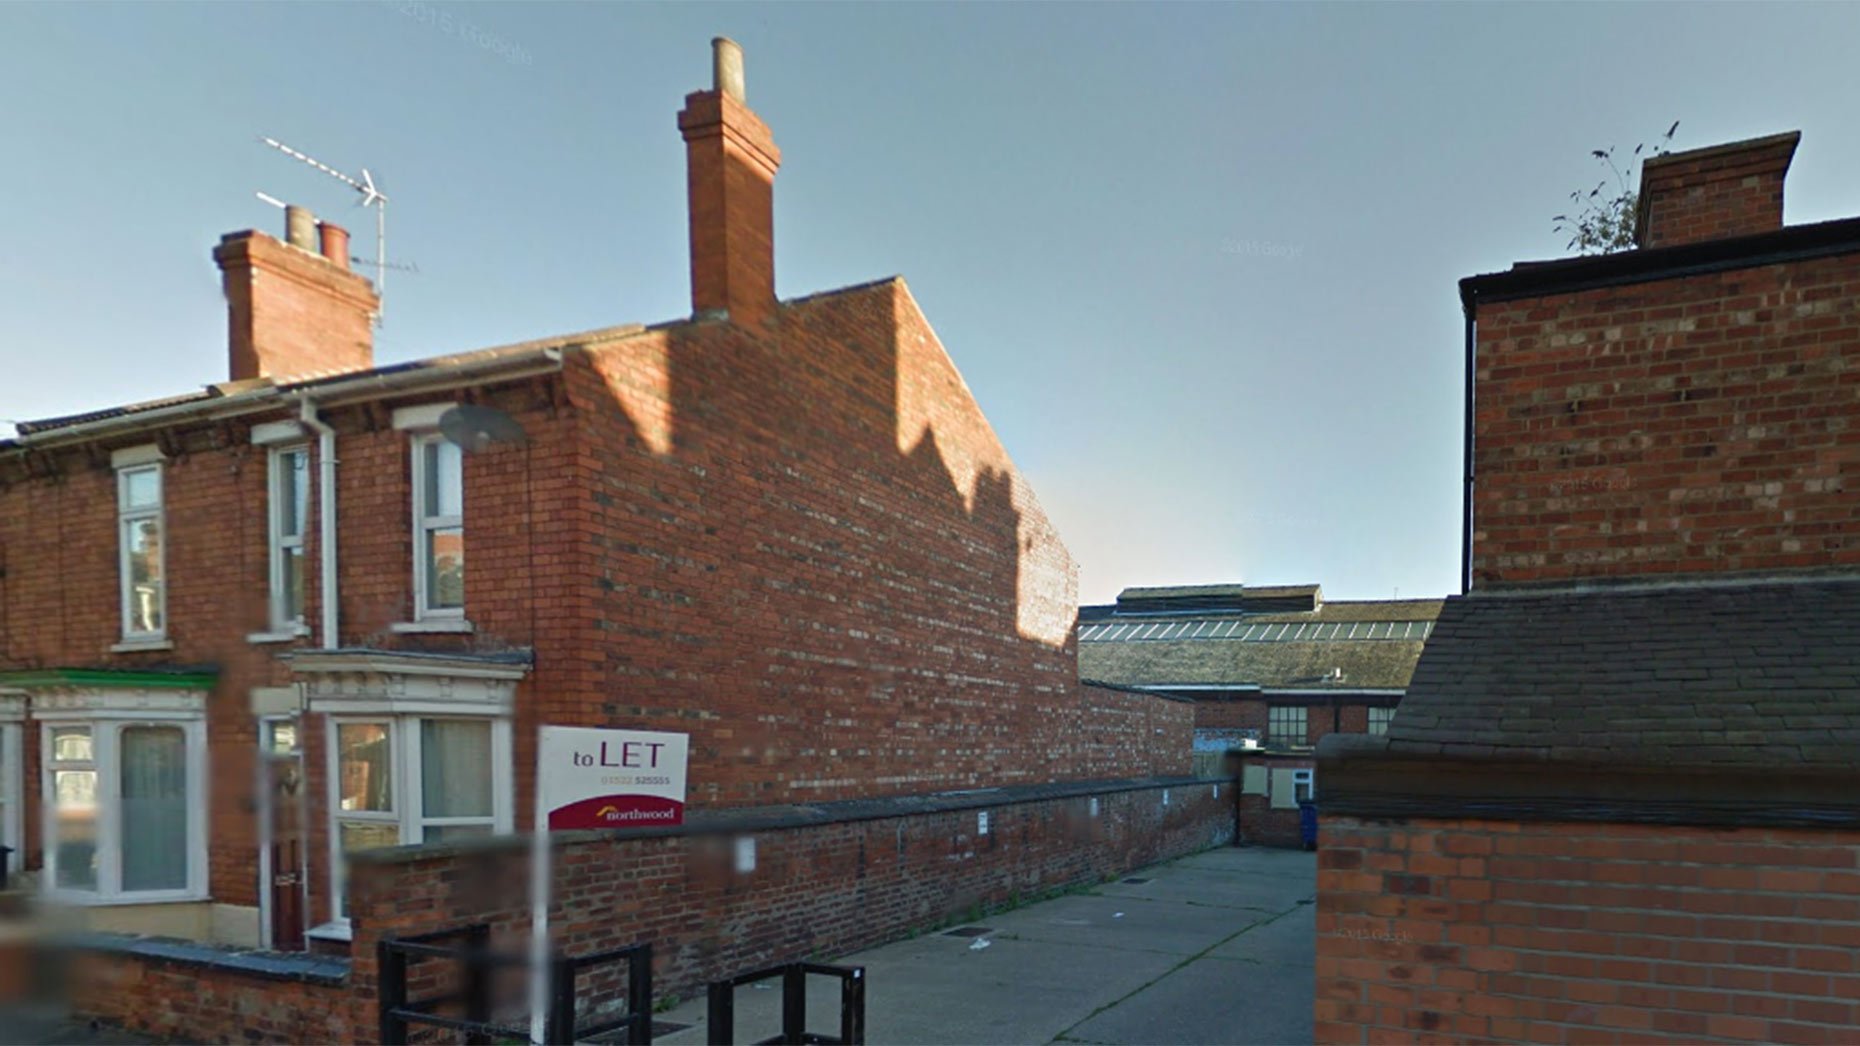 The terrace on Gaunt Street will be filled in as part of the proposed development. Photo: Google Street View